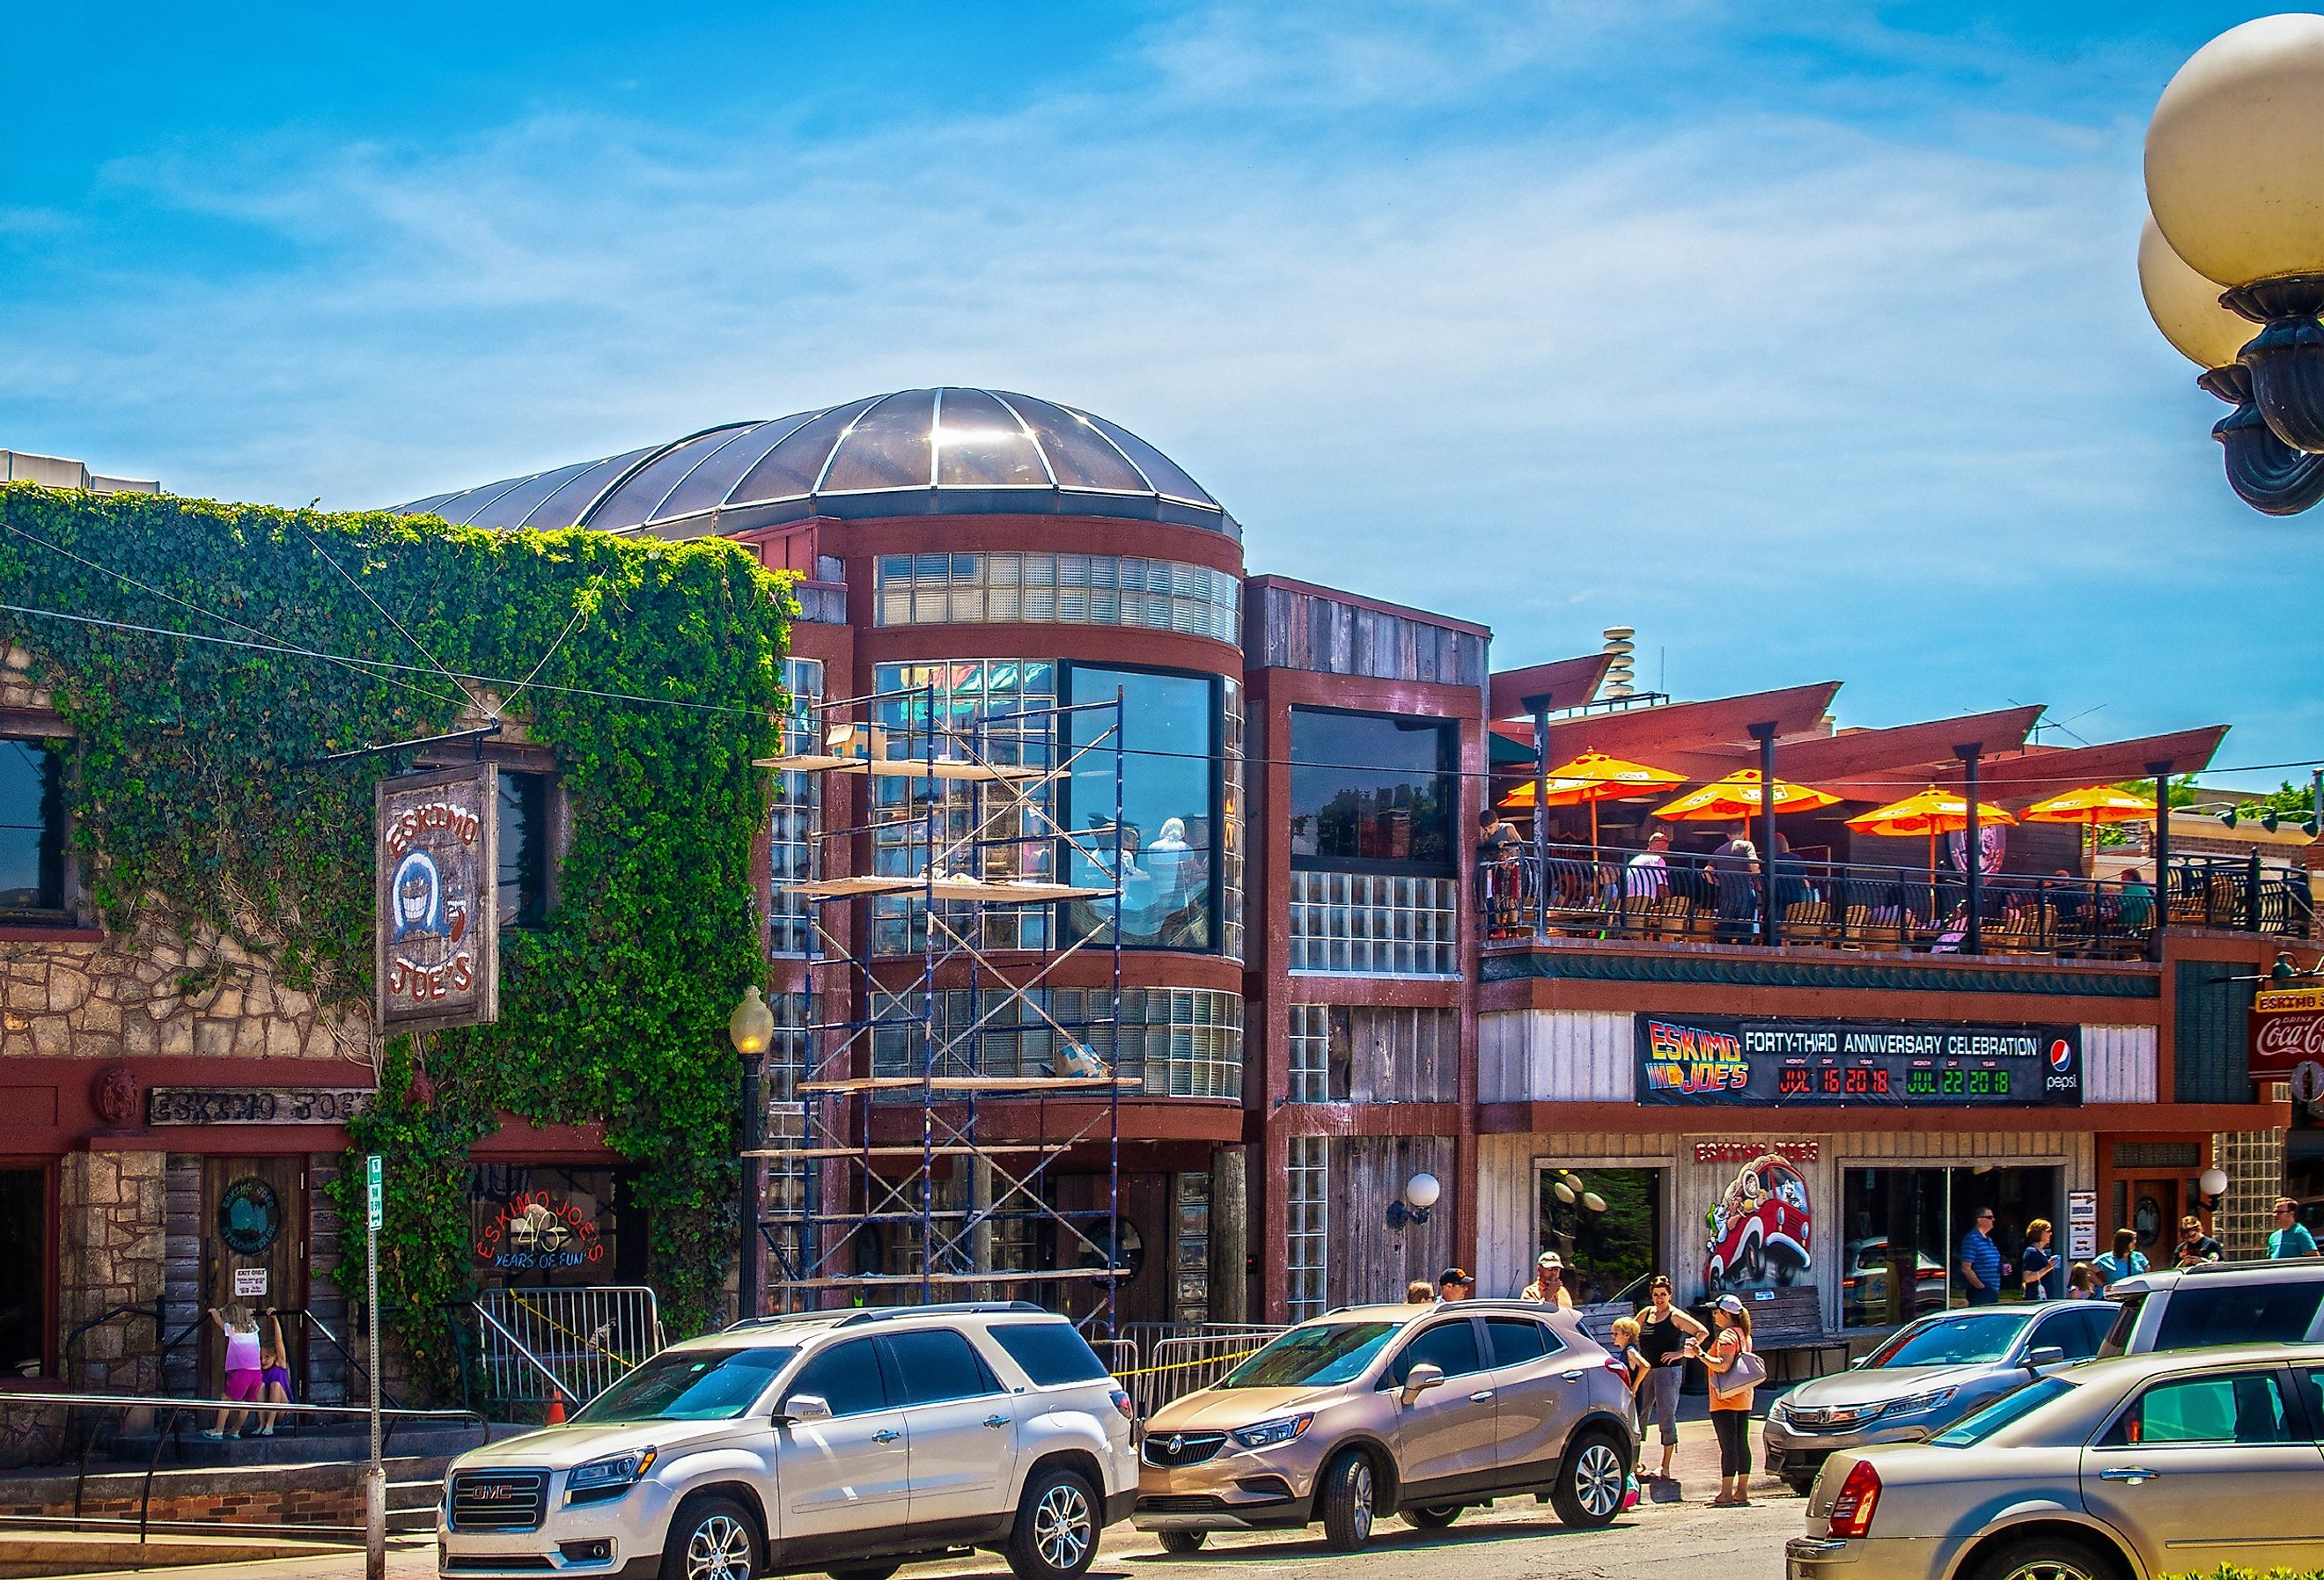 Eskimoo Joes resturant and bar under construction with people standing out front and eating on balcony near Oklahoma State University in Stillwater. Image credit Vineyard Perspective via Shutterstock